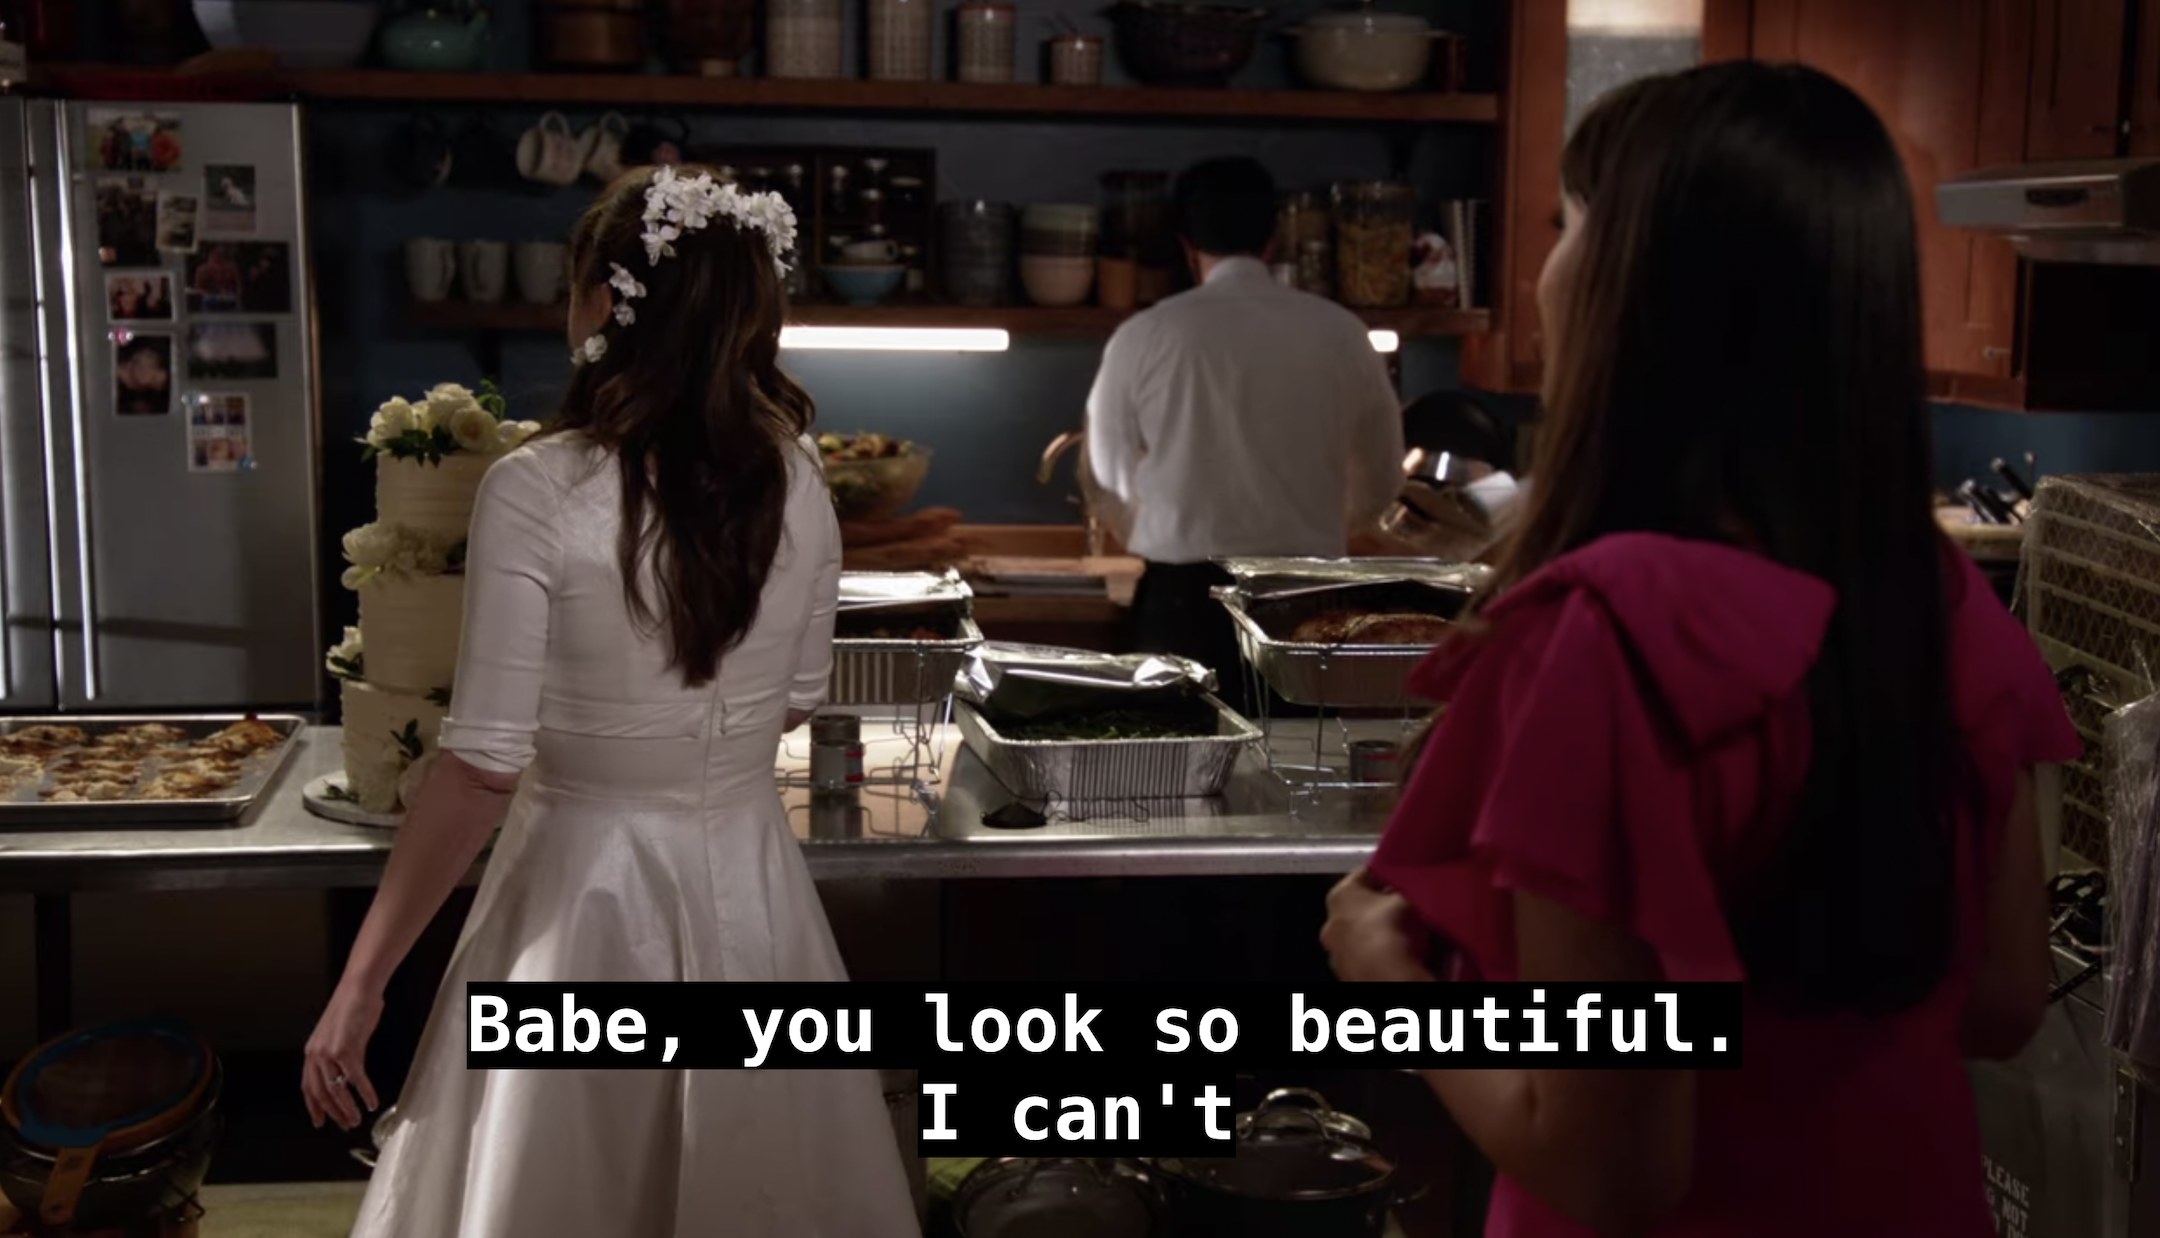 Cece says, babe, you look so beautiful I cannot